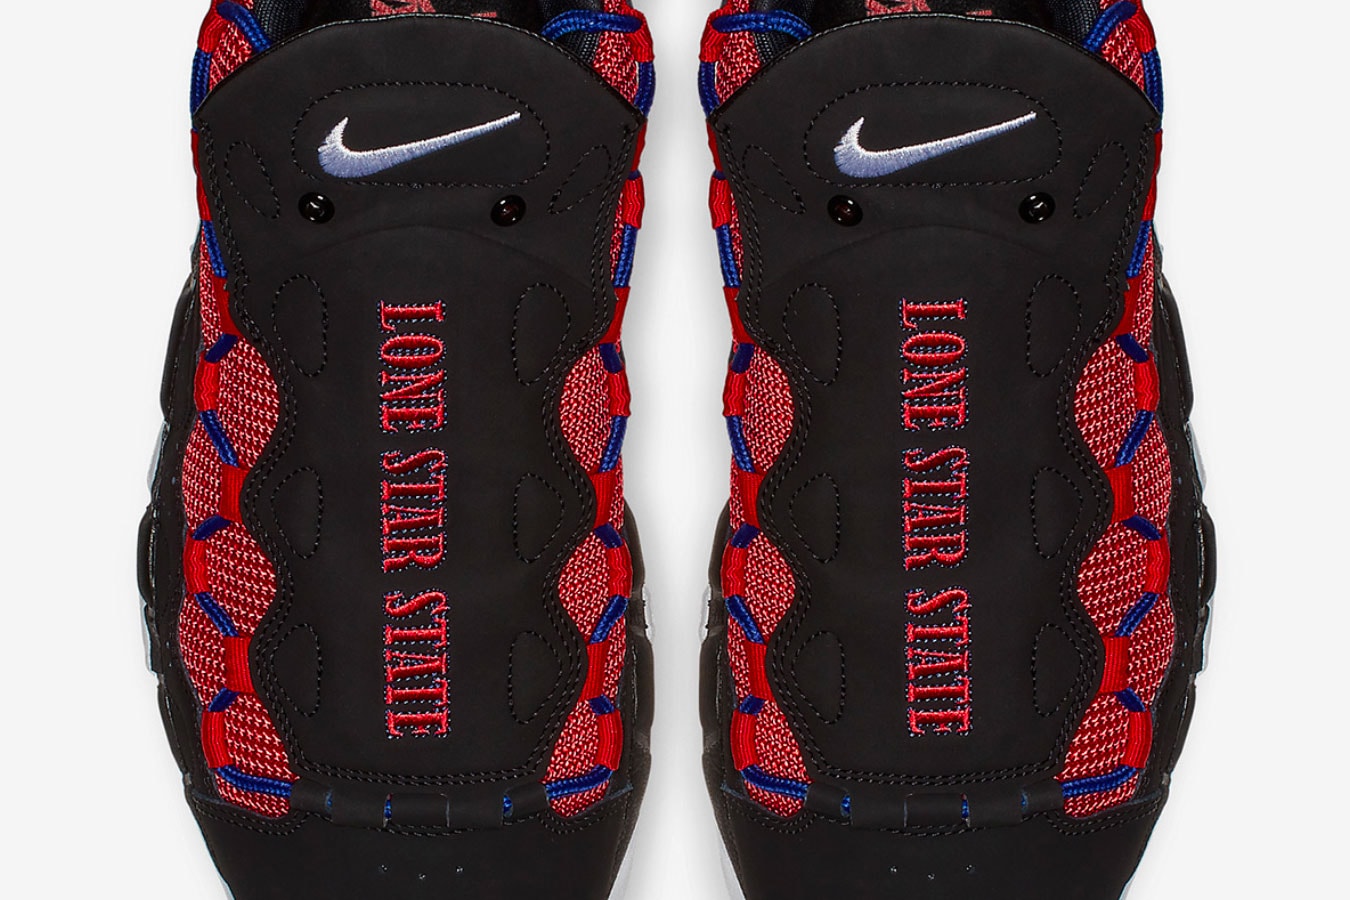 Nike Air More Money "Lone Star state" Release Date november 2018 price texas flag sneaker colorway black red blue white